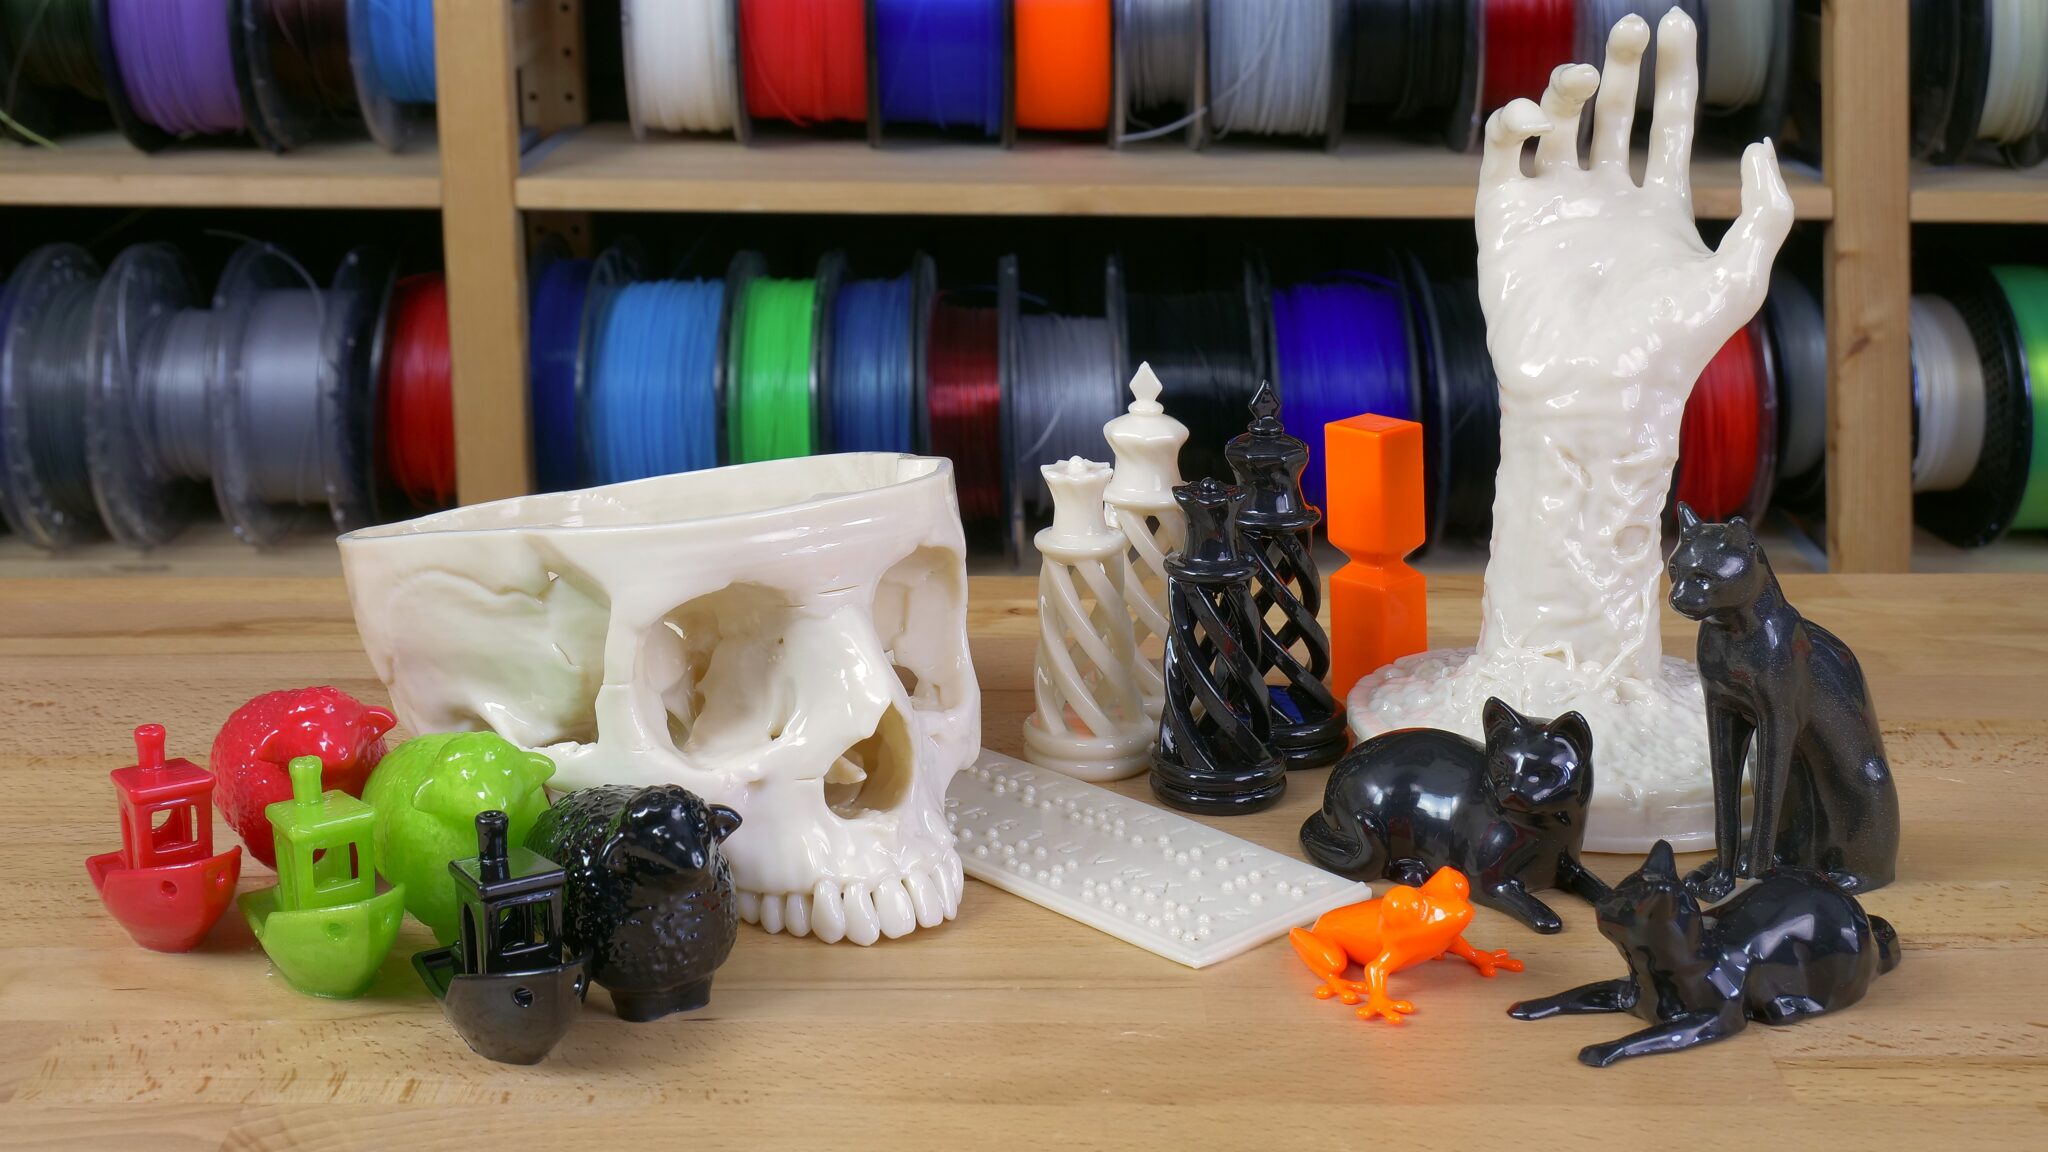 image of 3d printed objects